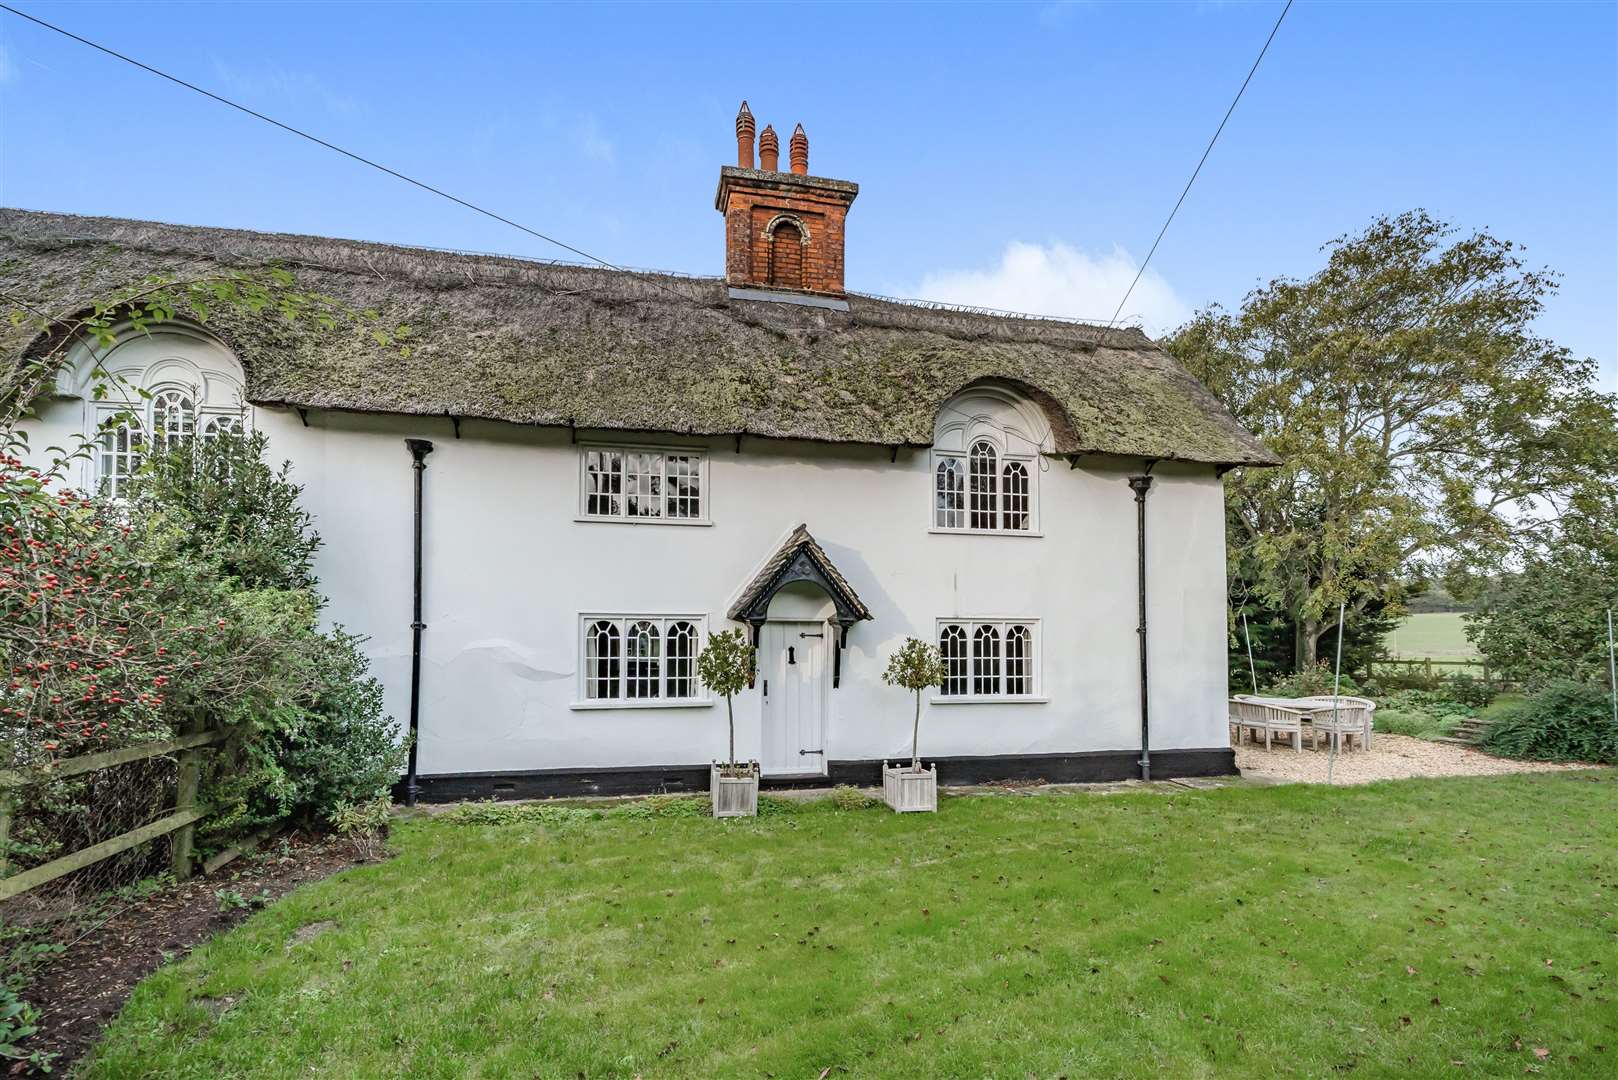 “Coupled with the delightful gardens, stables and paddock – this is a very special village property"